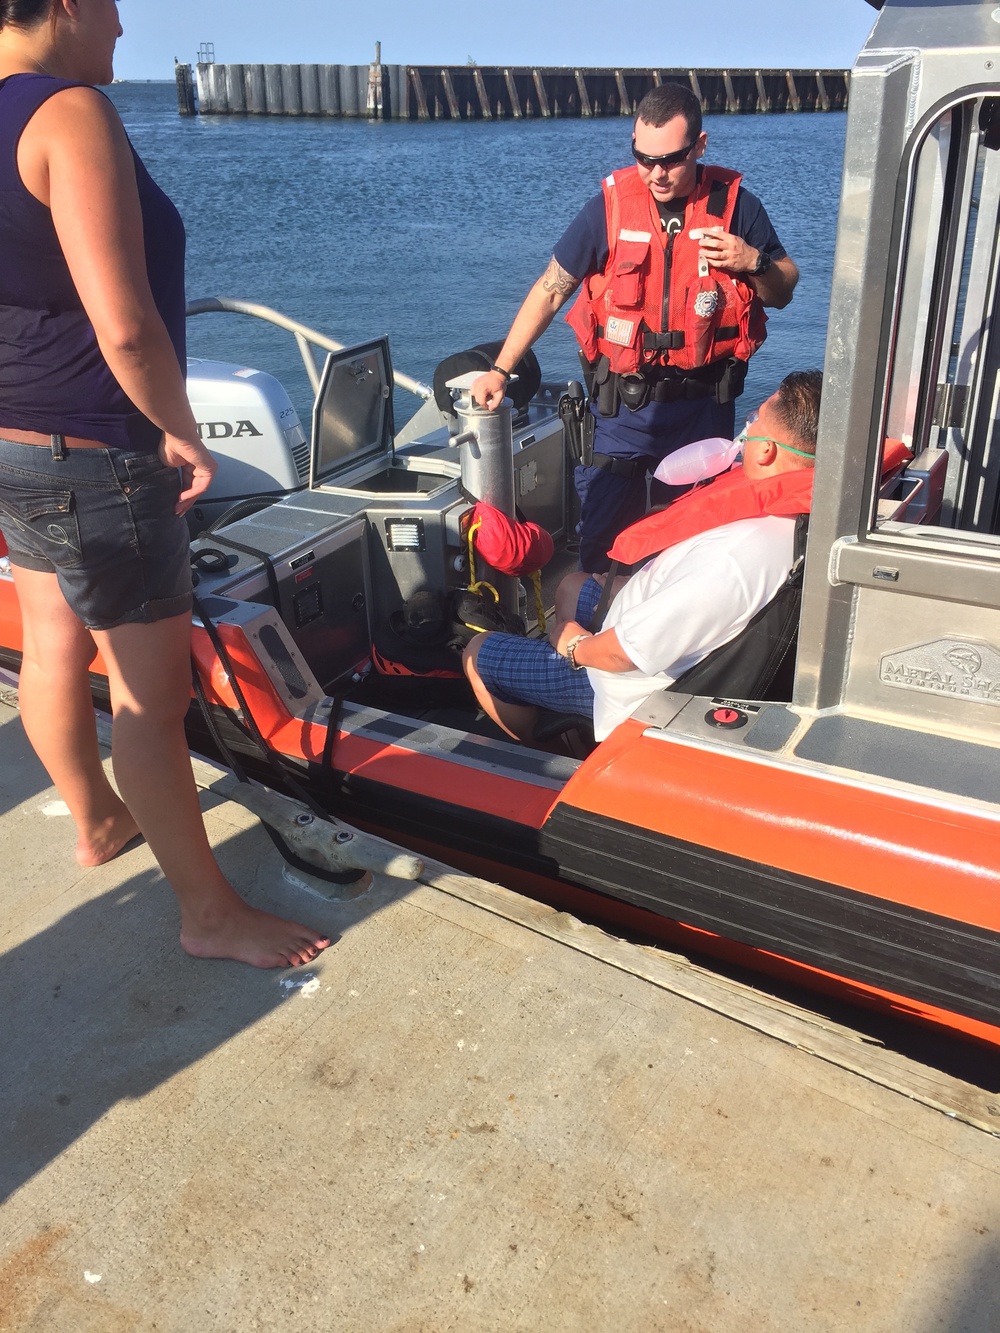 Coast Guard Station Fire Island rescues two after boat runs aground